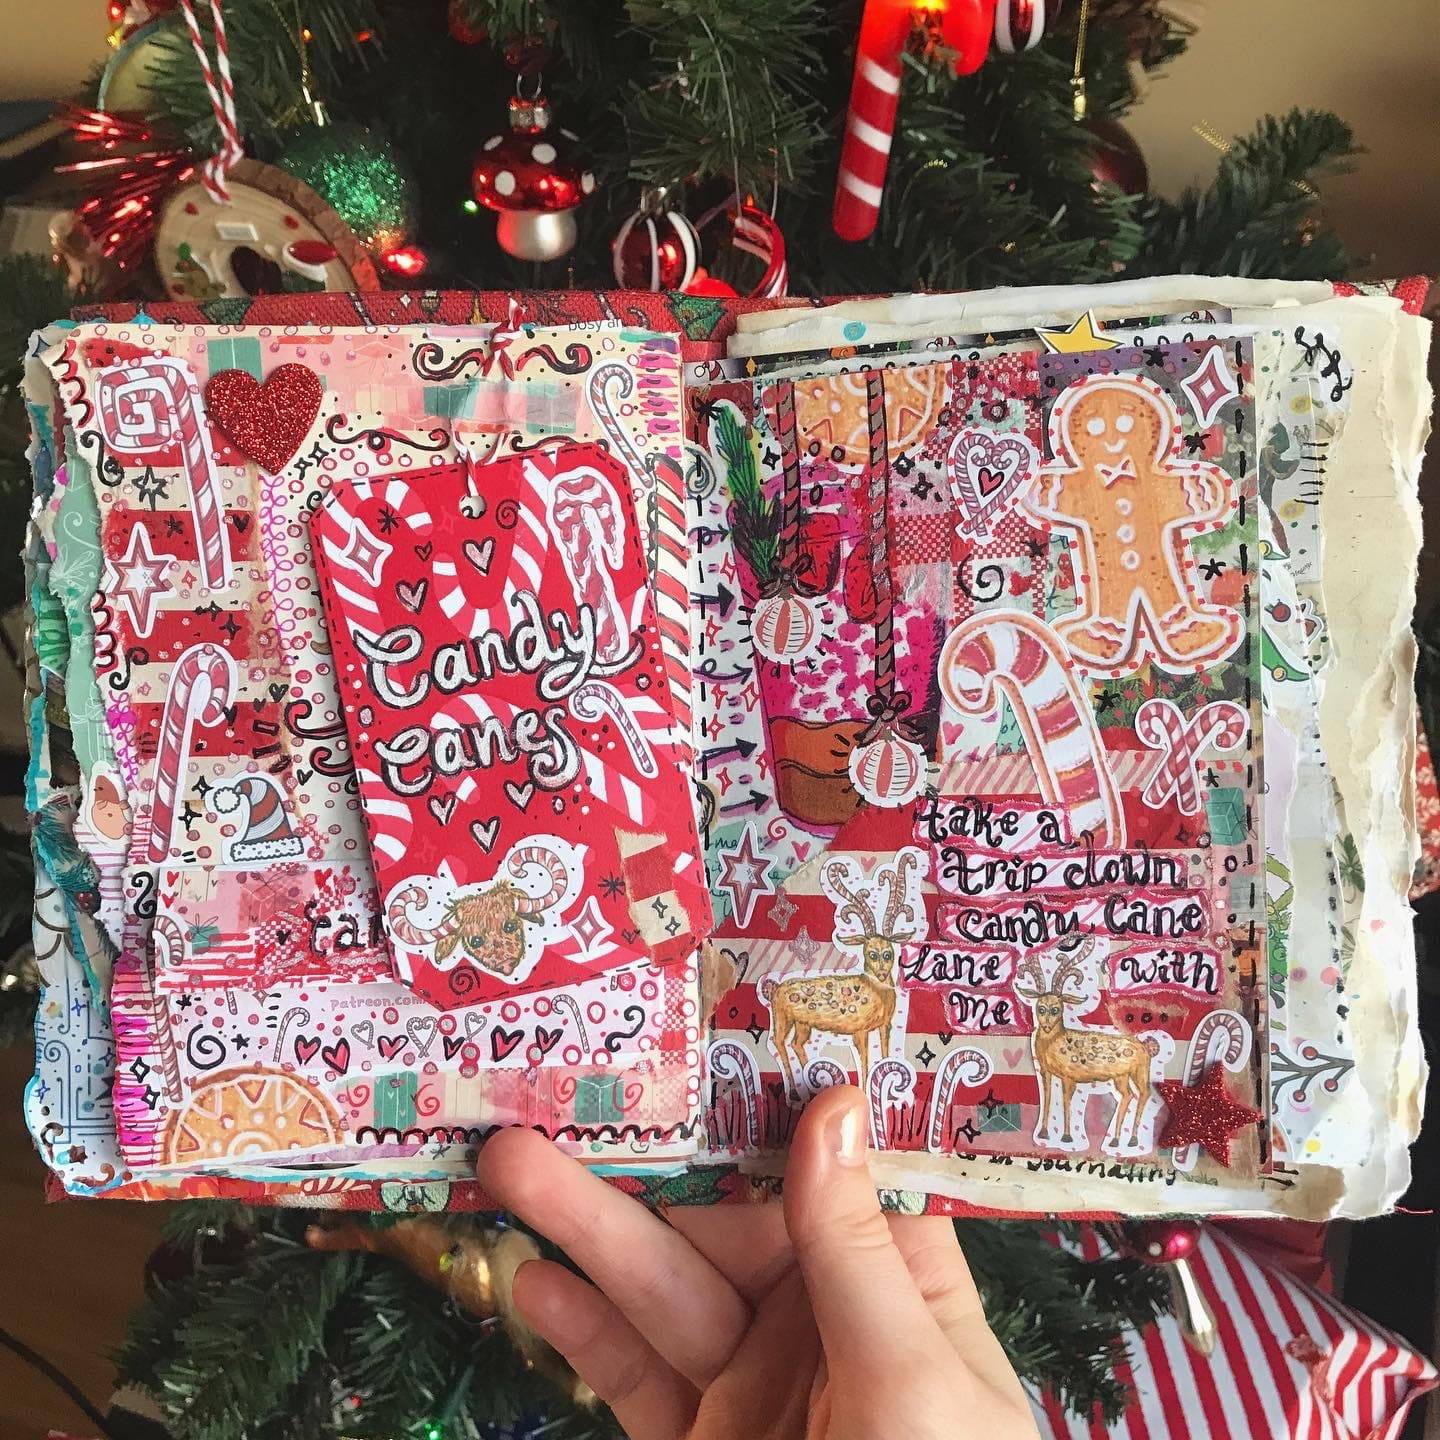 Candy Cane Creatures art journal and sticker sheet by Kia Creates